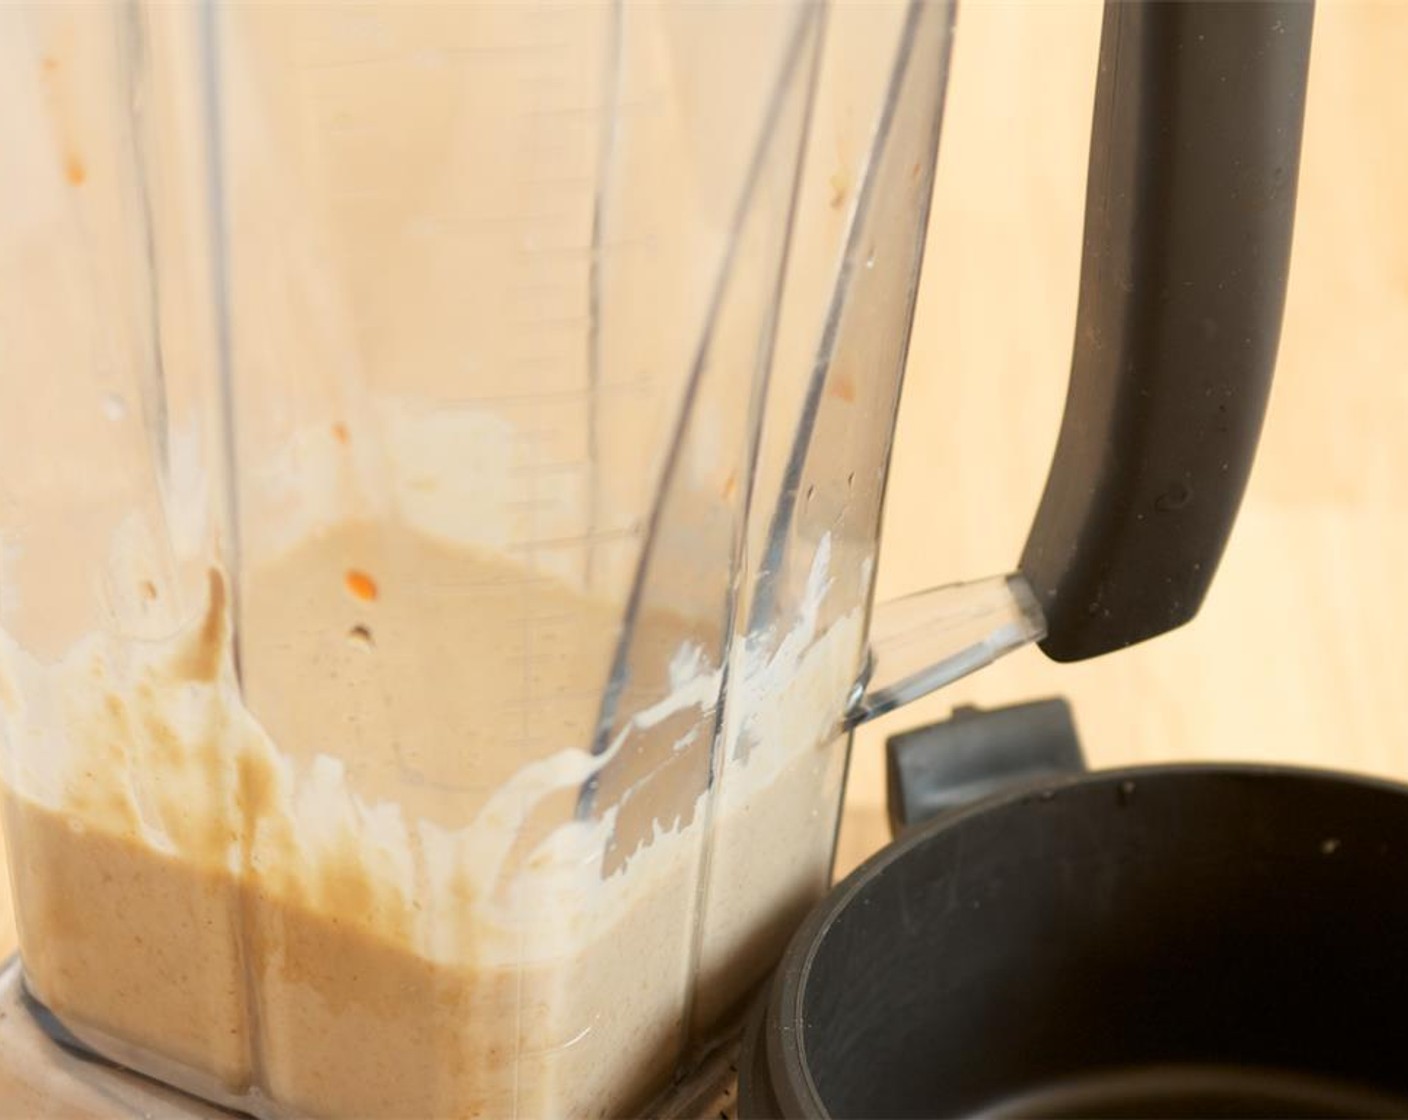 step 6 Place Cashew Butter (1/2 cup), Maple Syrup (2 Tbsp), Chili Paste (1 tsp), Coconut Milk (1/4 cup), Water (1/4 cup) and Sea Salt (1 tsp) in a blender. Blend on low until combined. Place the sauce in a serving bowl.